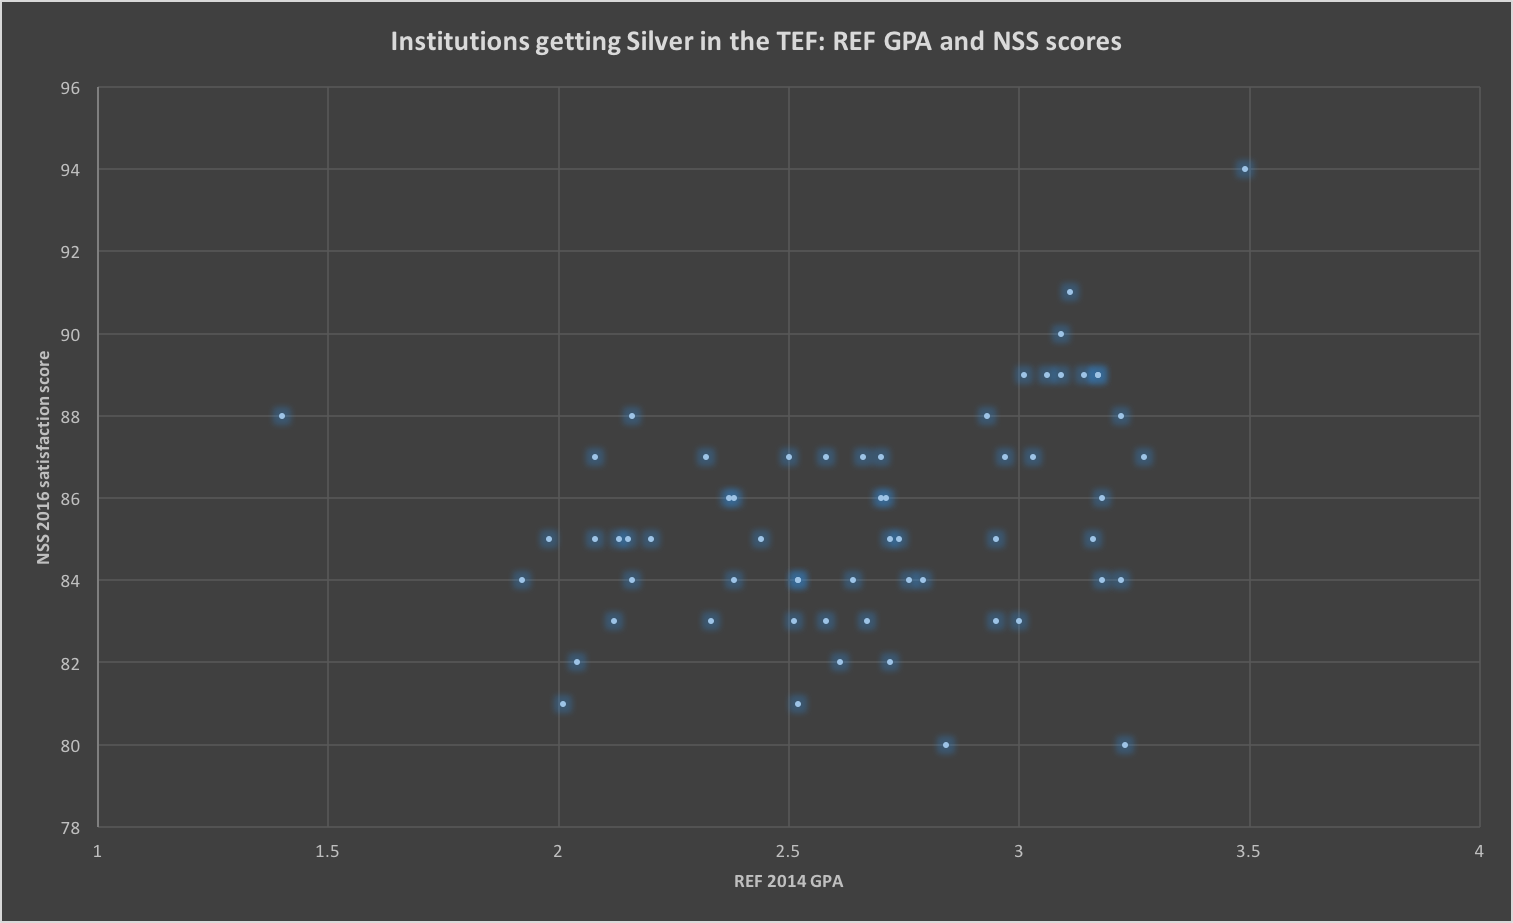 Institutions getting Silver in the TEF: NSS and REF scores